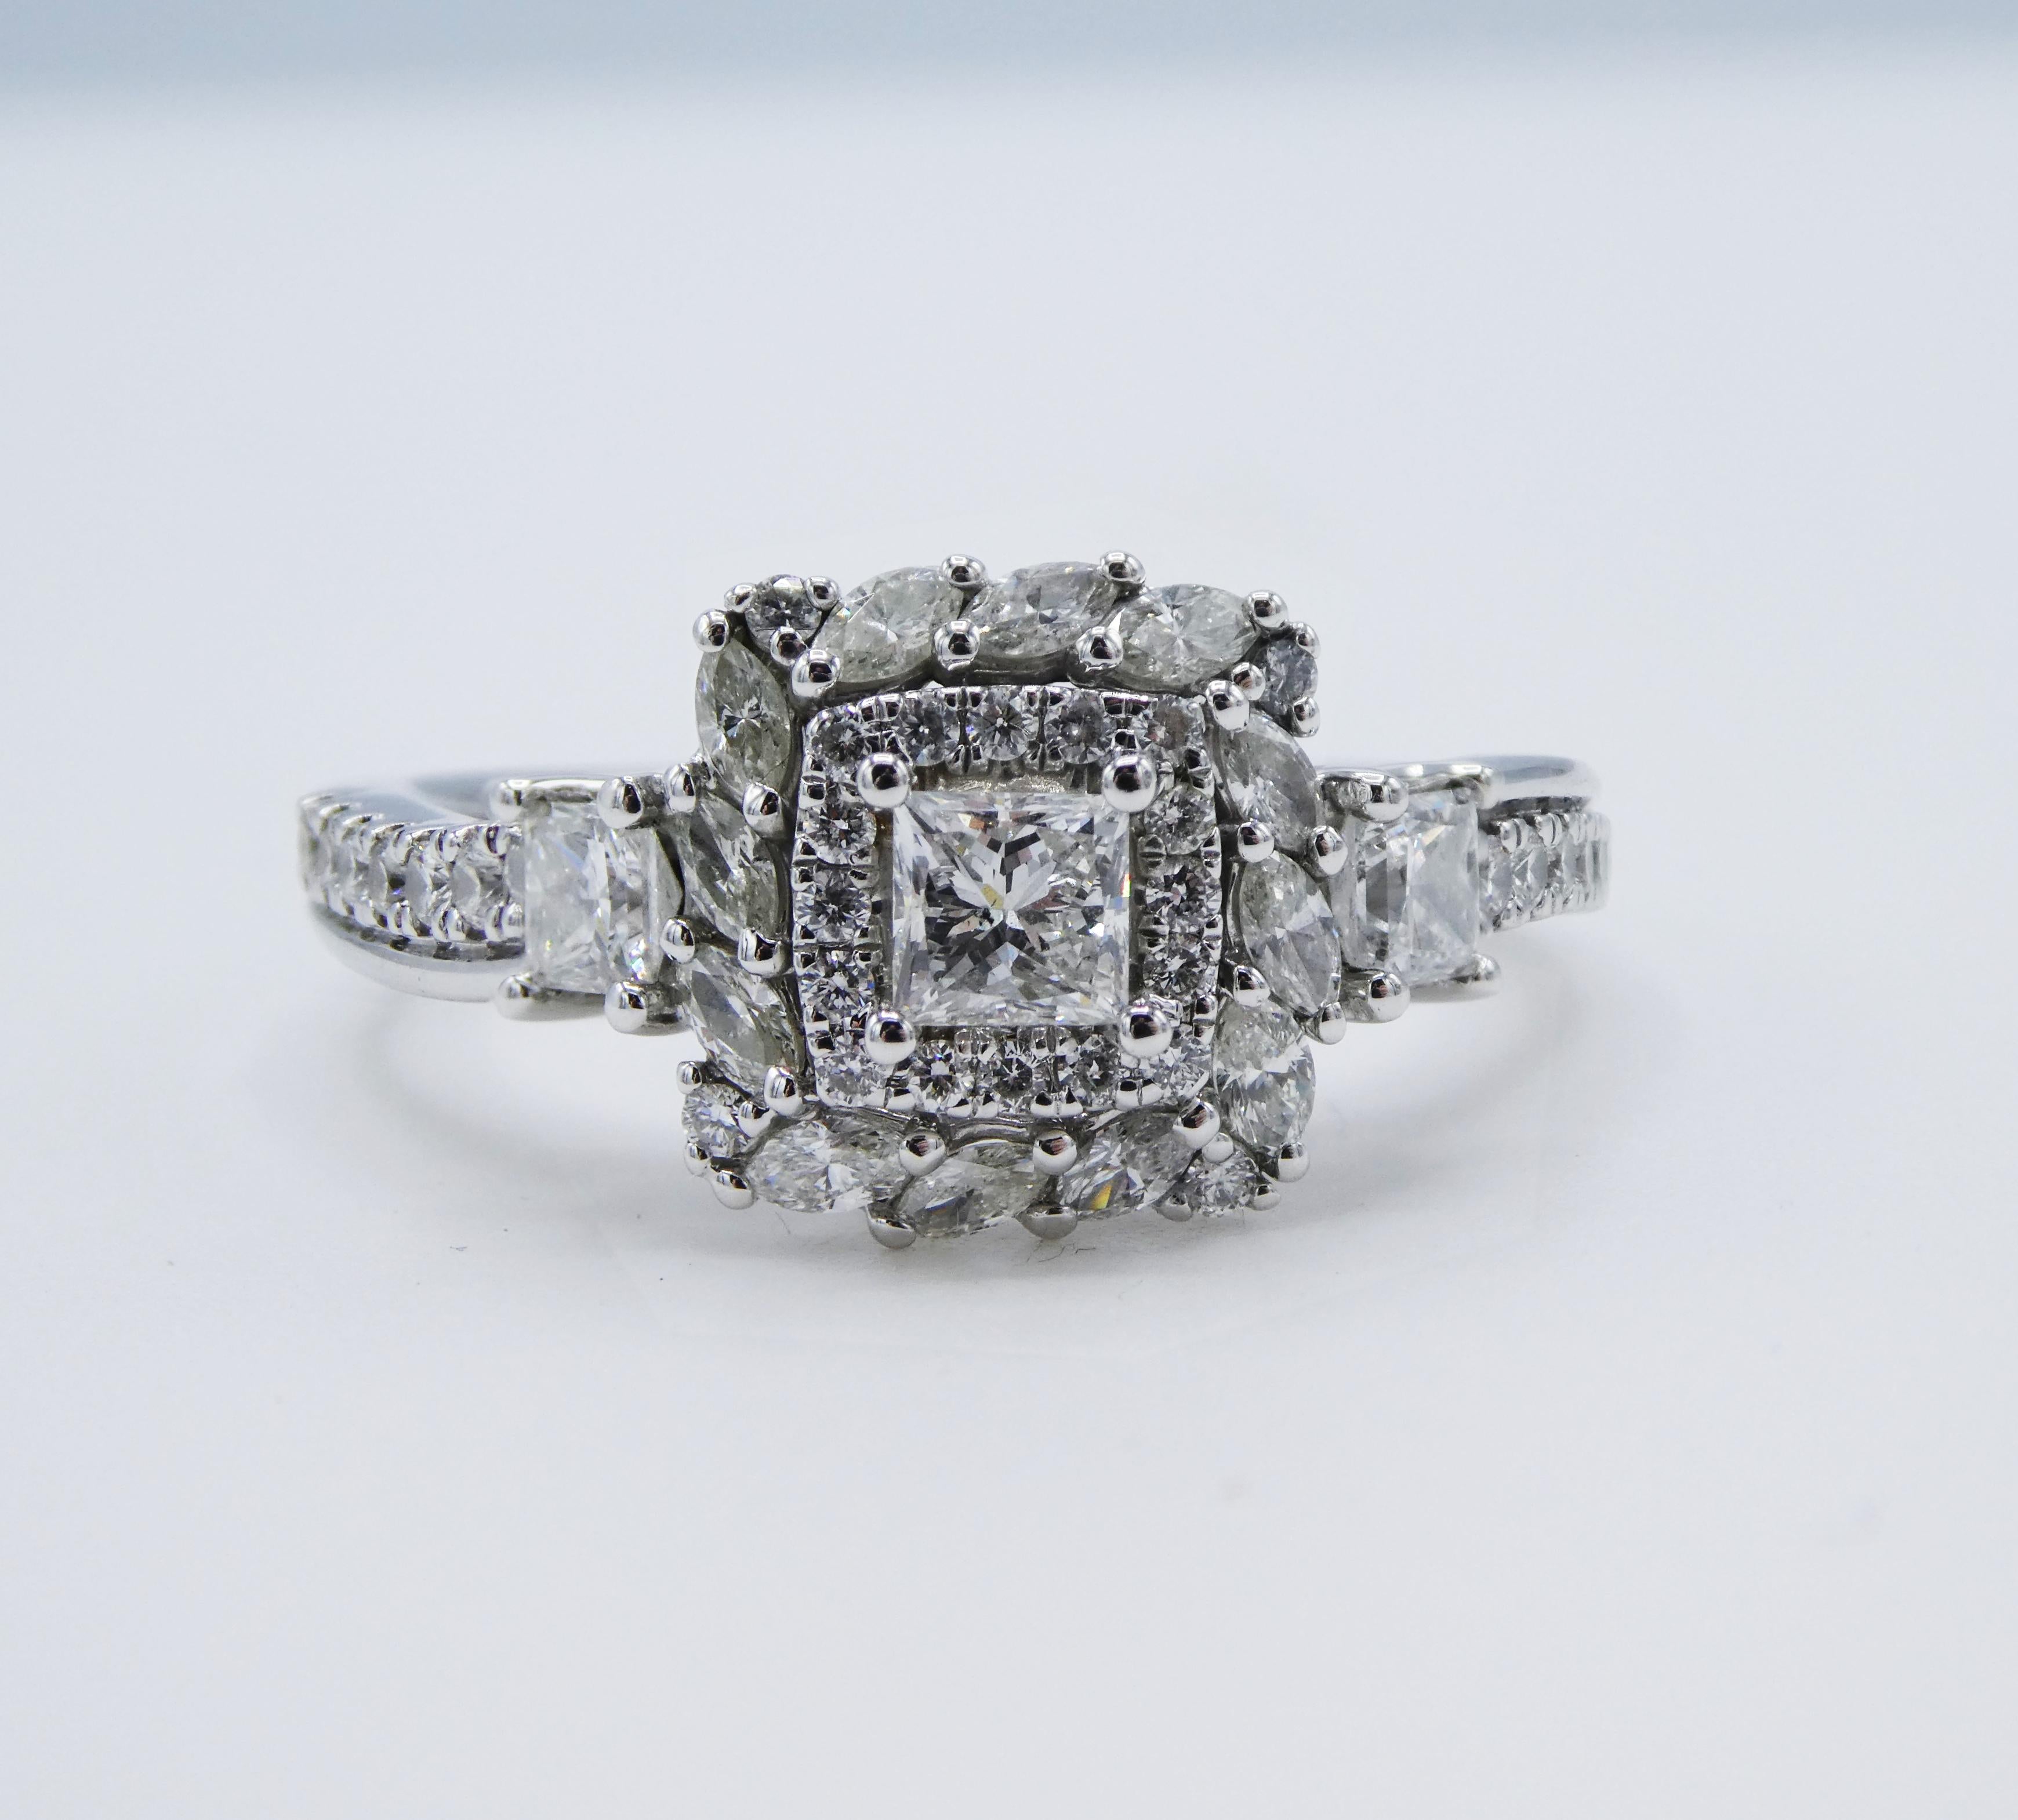 Vera Wang 1.00 CTW Diamond 14k White Gold Double Halo Engagement Ring Size 10

Metal: 14k White Gold, marked 14KT
Weight: 6.53 grams
Diamonds: 49 diamonds, approx. 1.00 CTW G-H SI
Top of ring measures approx. 11 x 11mm 
Size 10
Signed: Vera Wang